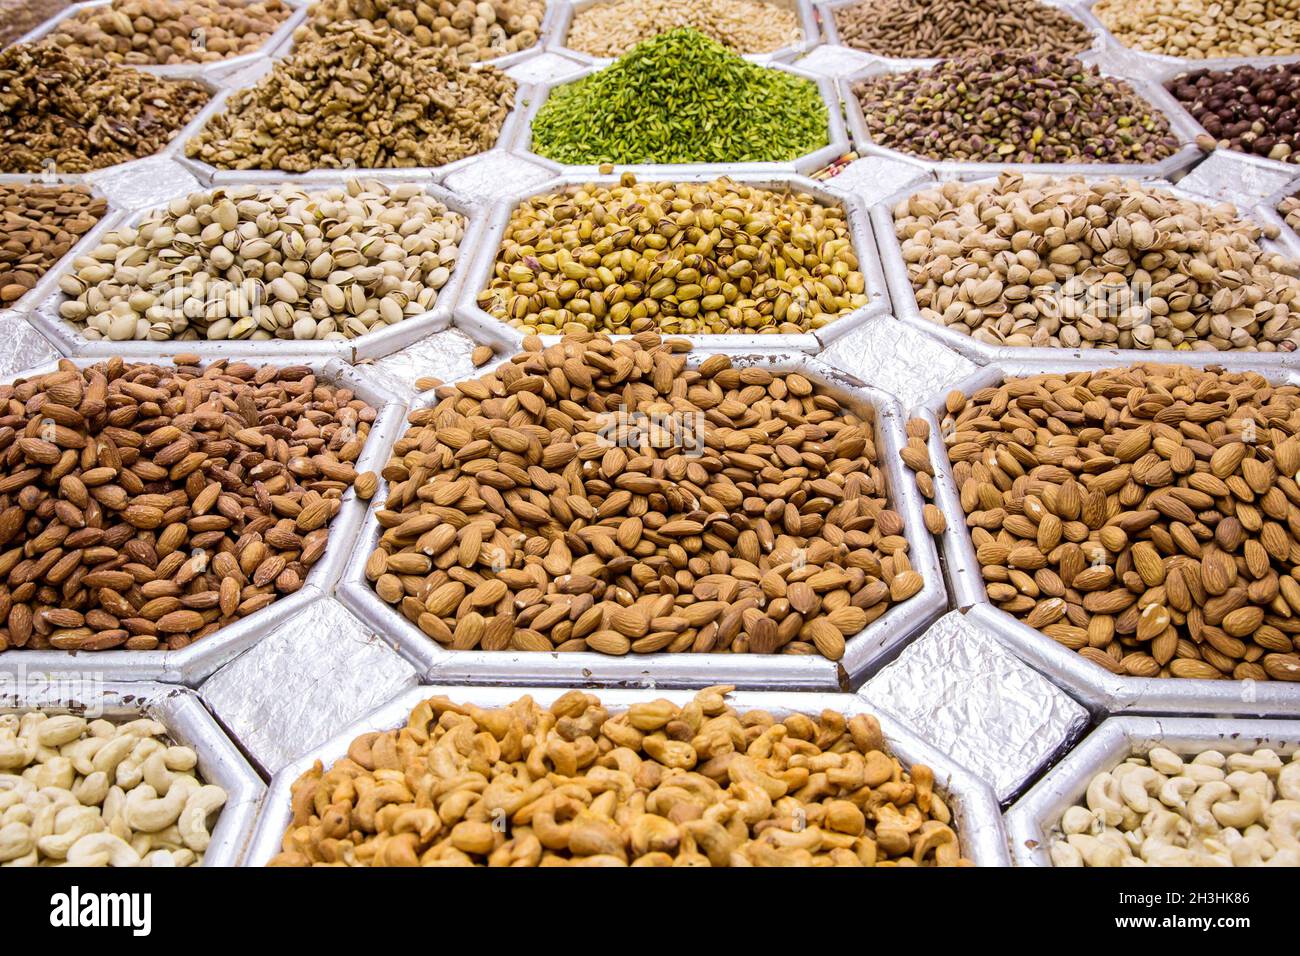 Dried fruit and nuts mix in Dubai market Stock Photo